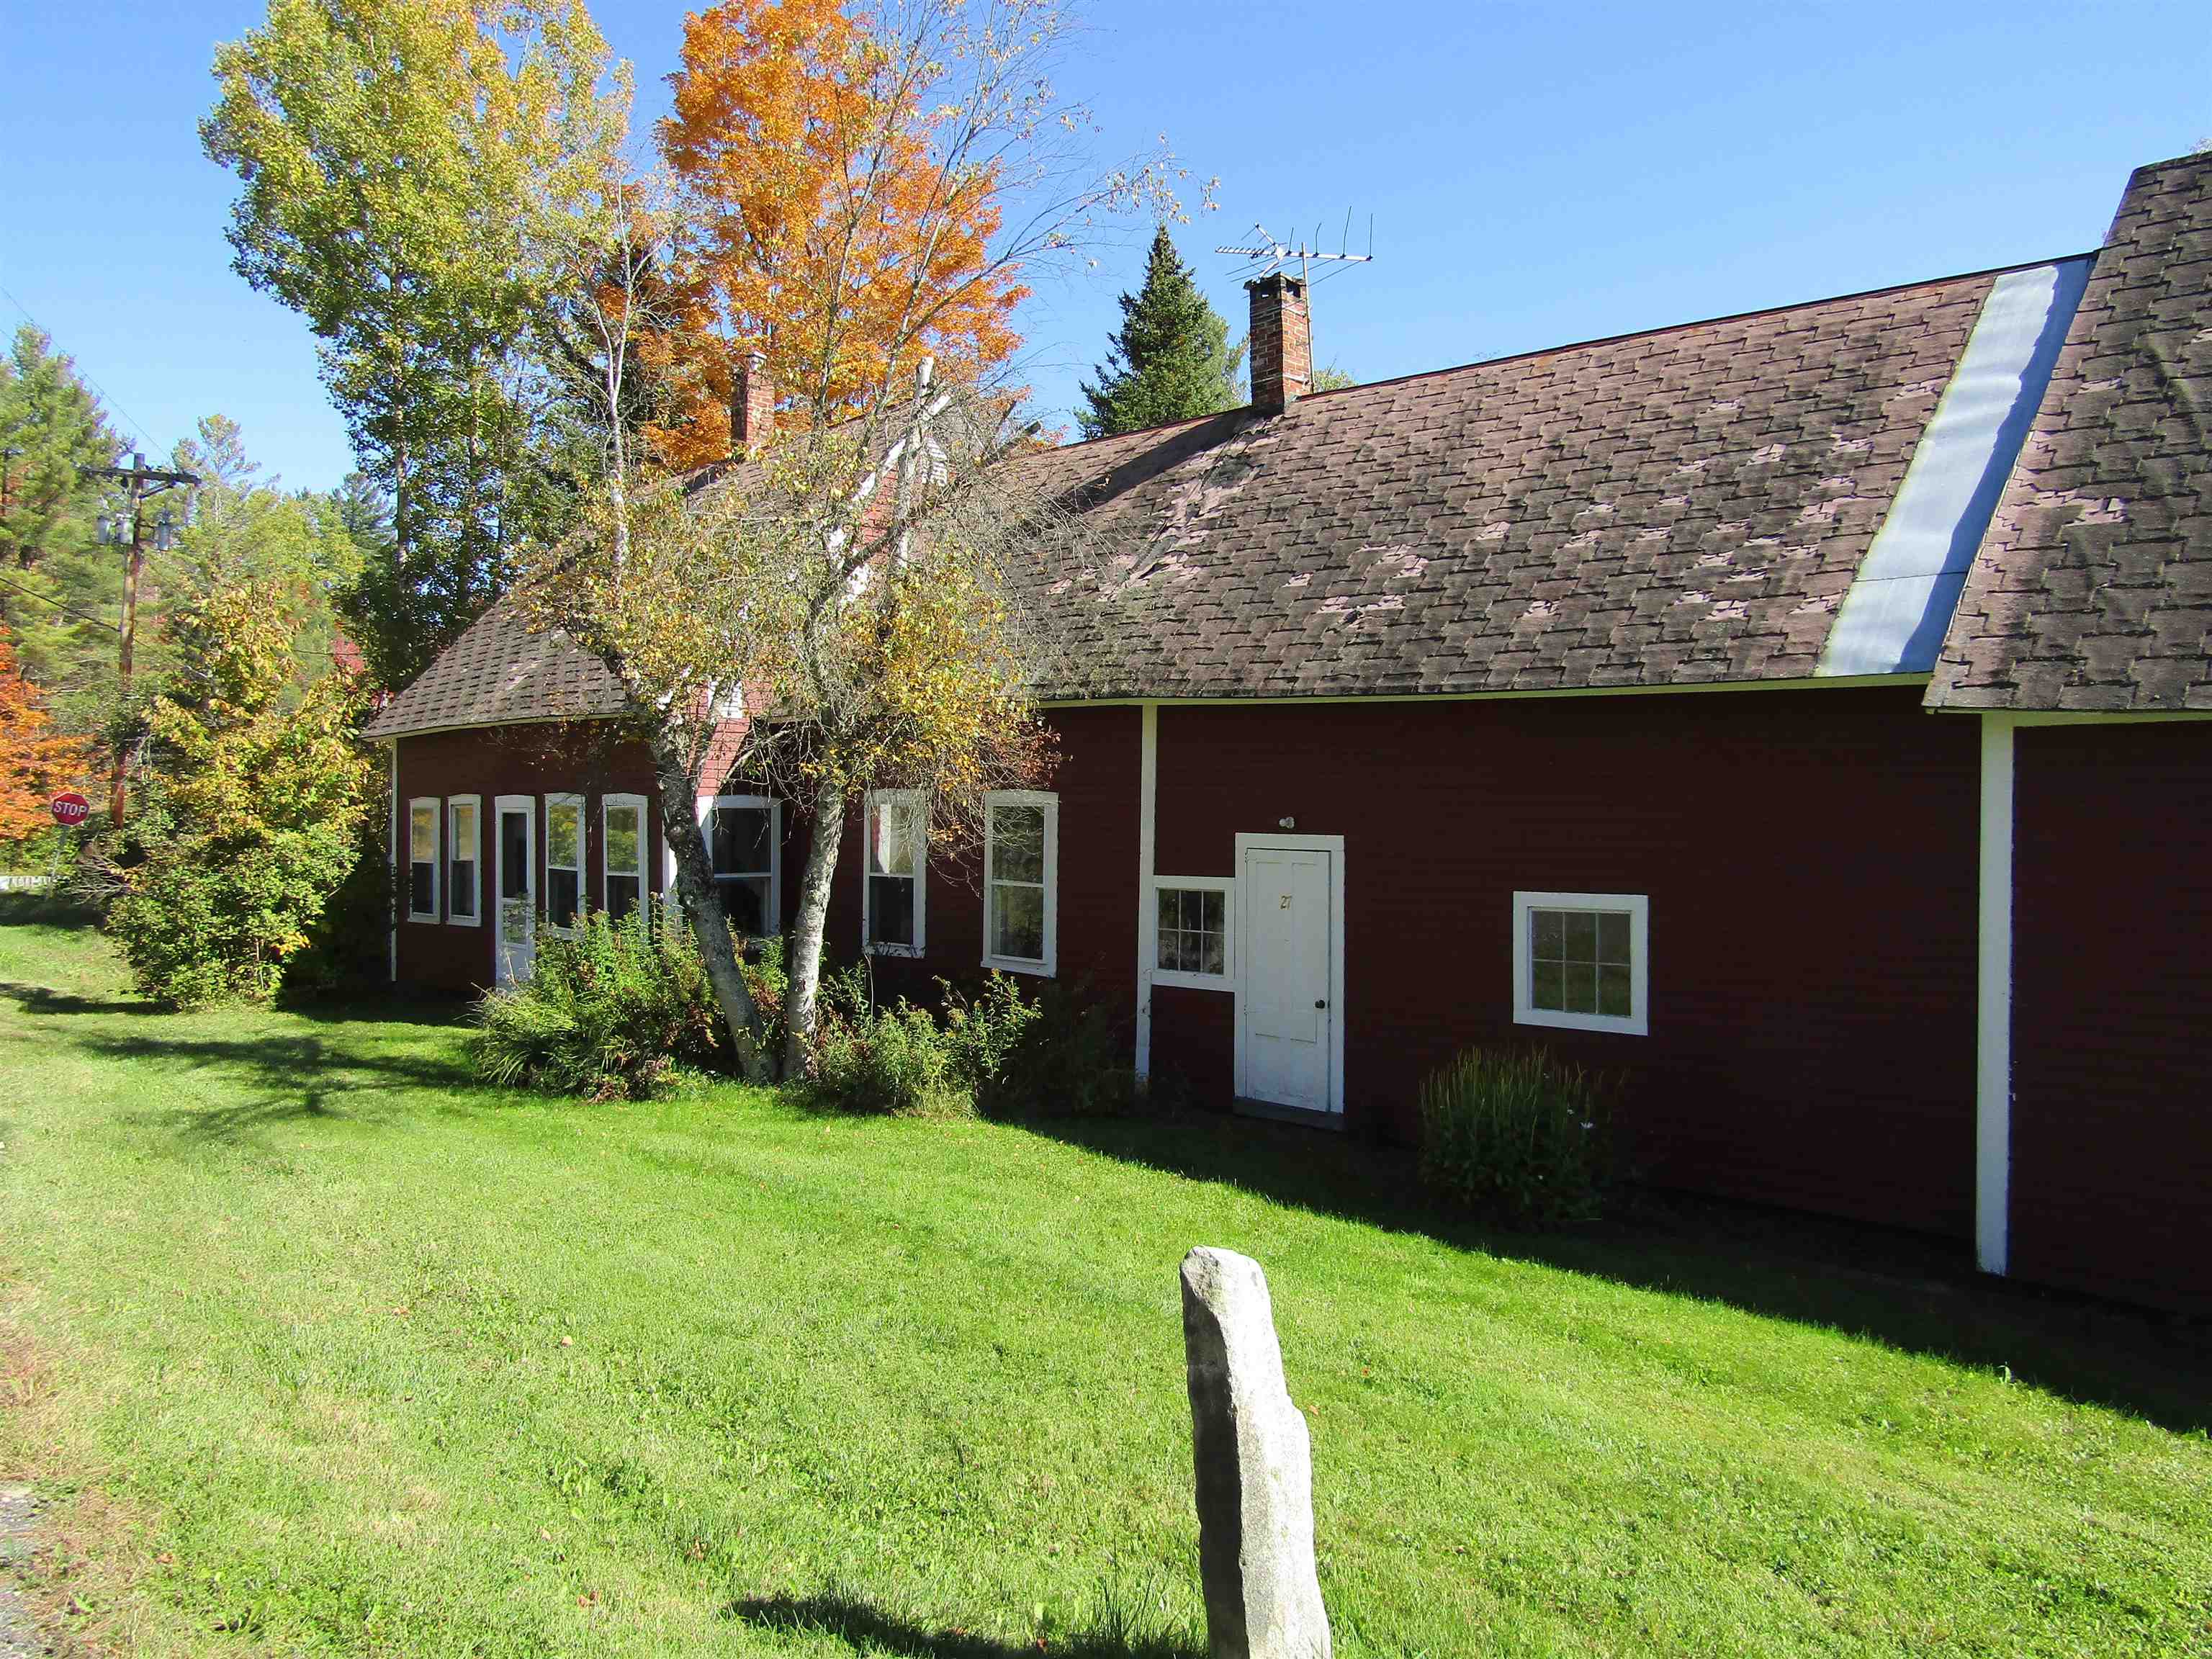 GROTON VT Homes for sale